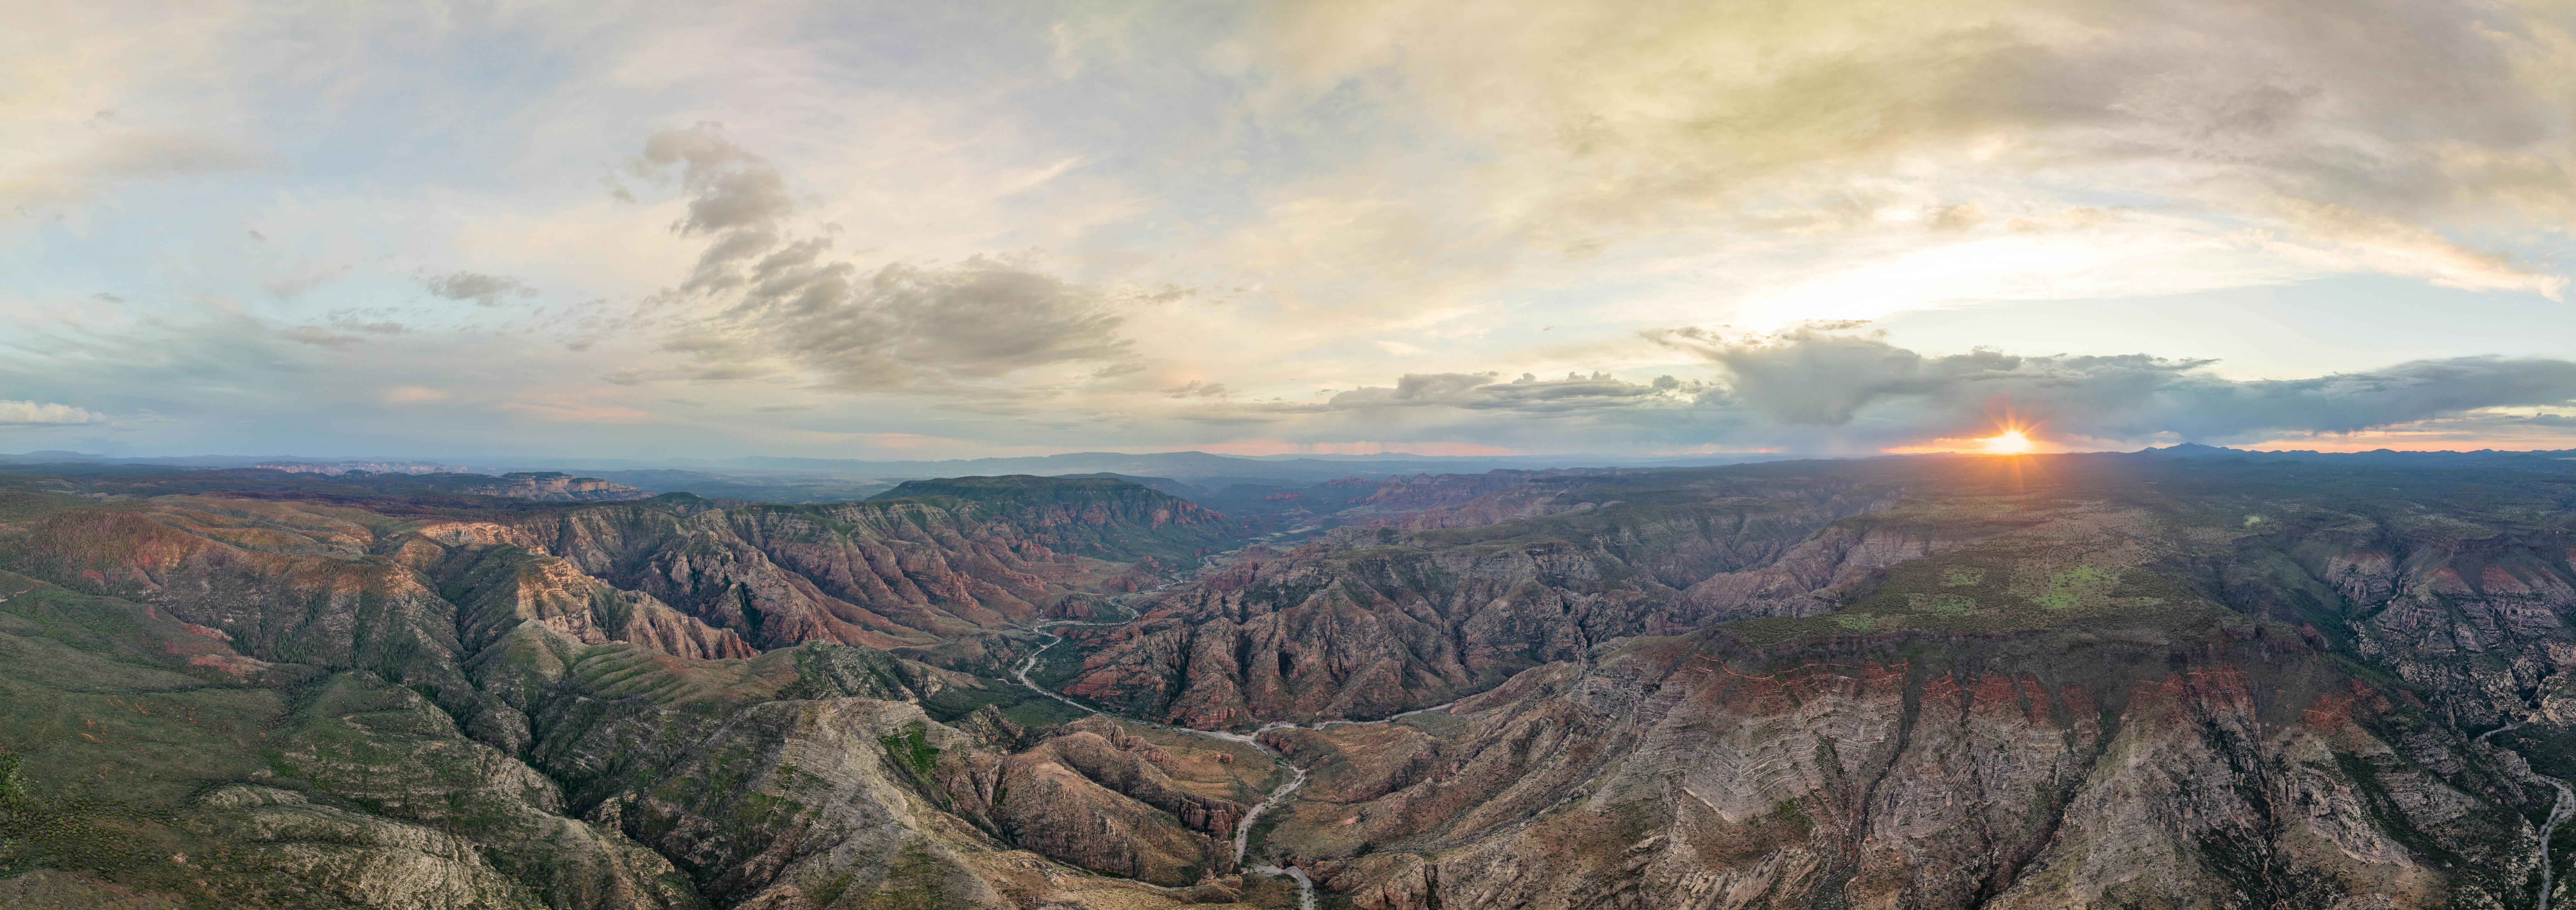 A panoramic photo of mountain ranges in Kaibab National forest by Jeff Poe